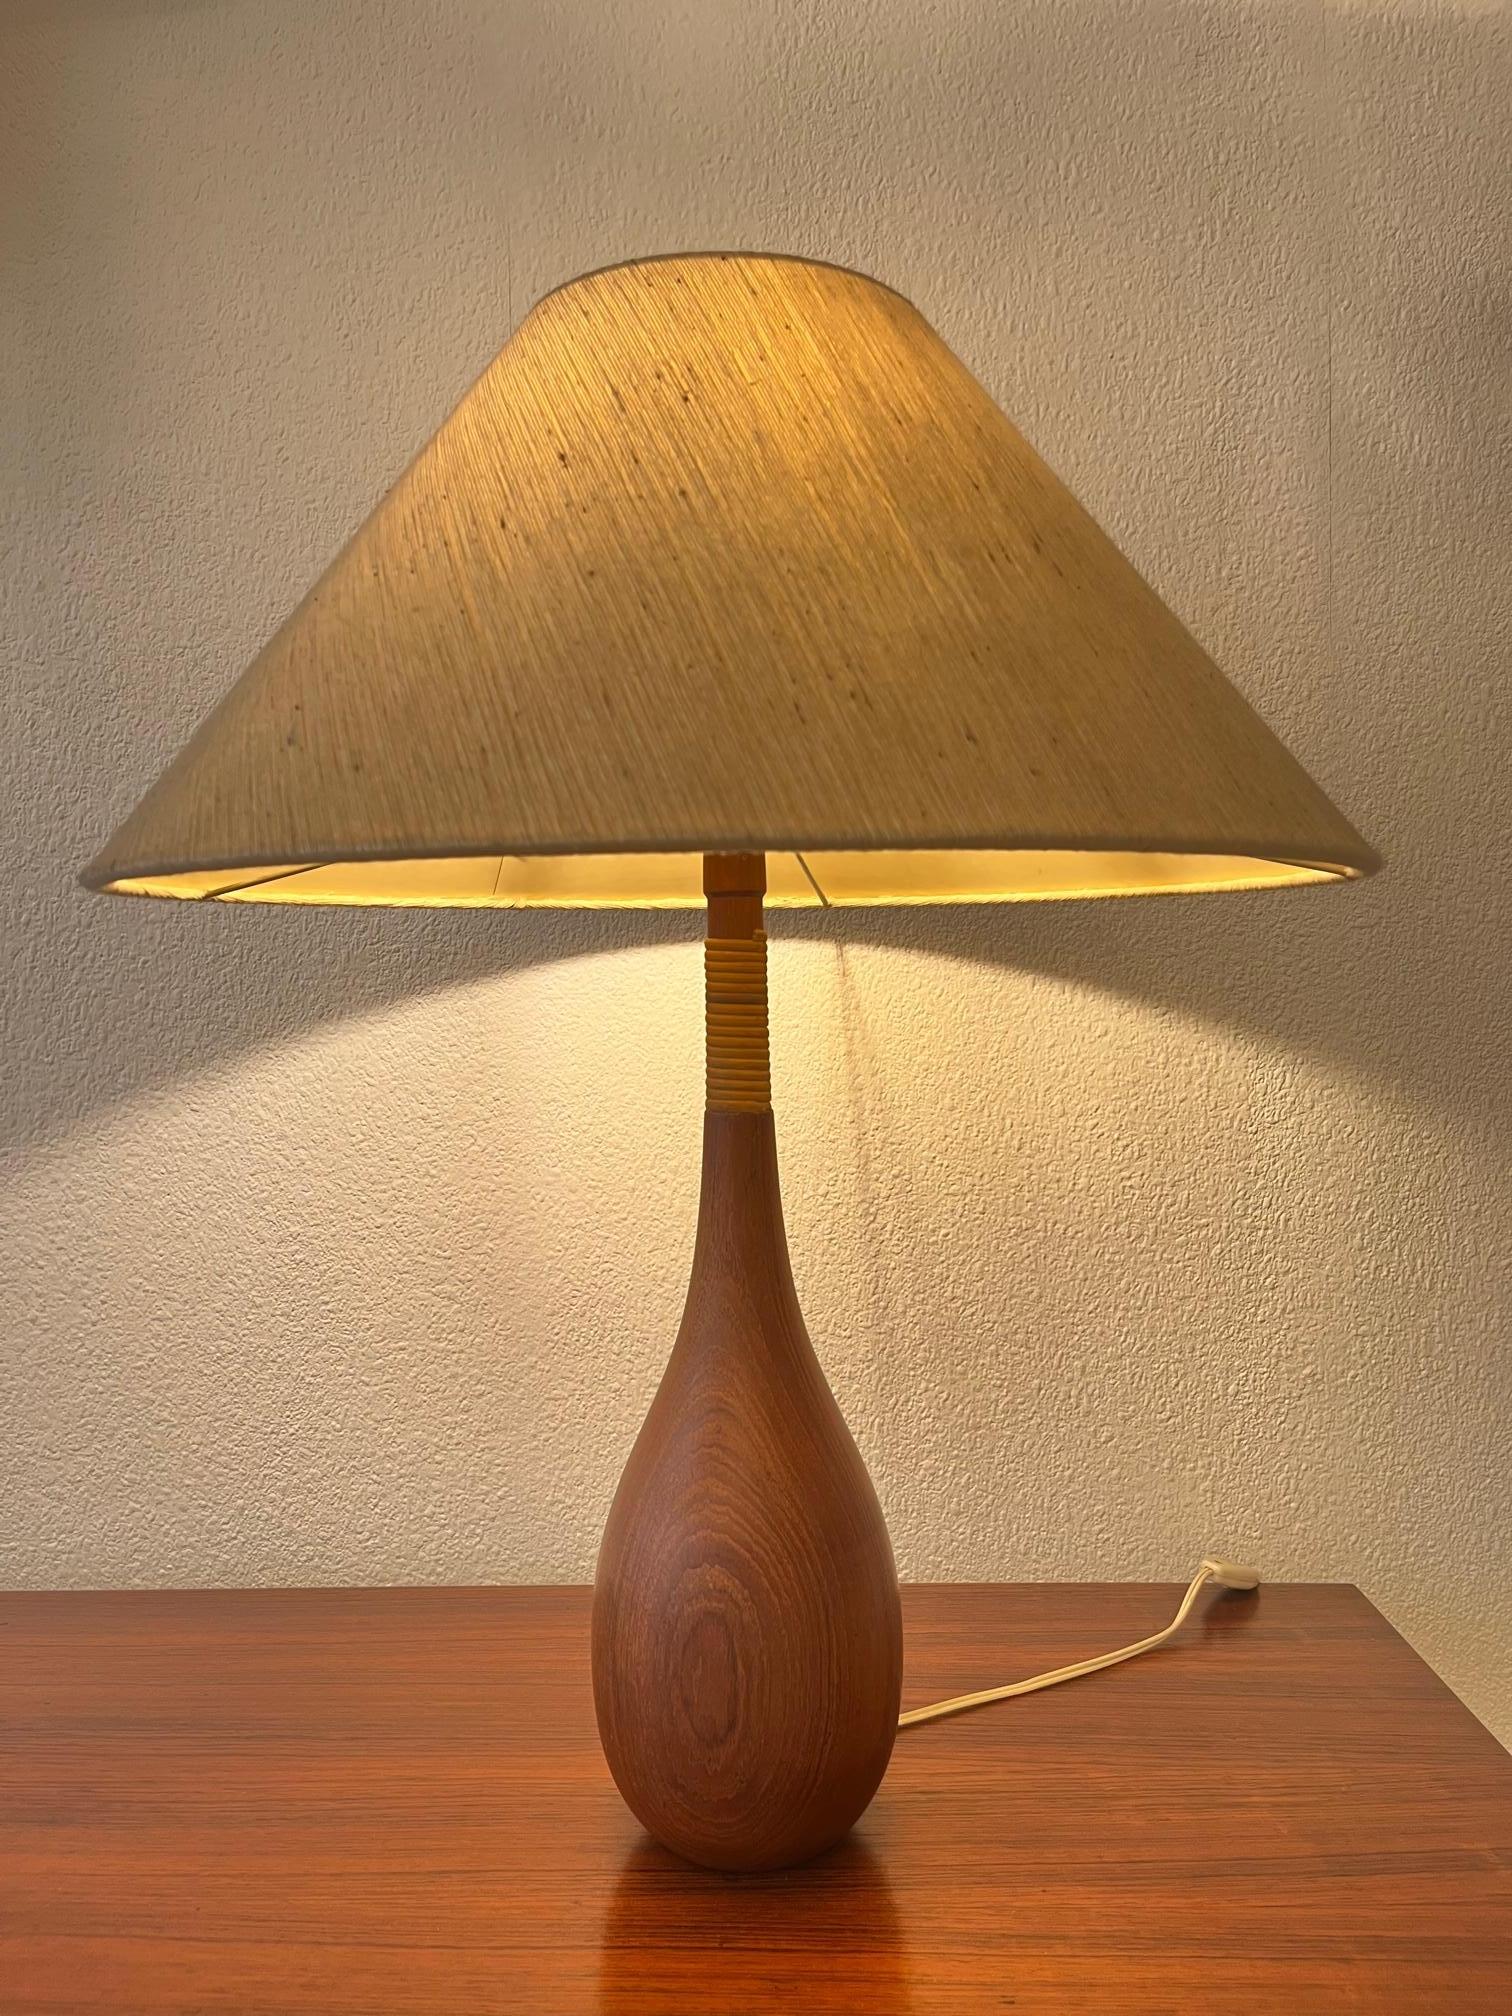 Teak and cane bottle shape table lamp with conical silk shade.
Good vintage condition.
H 68 x D 55 cm
